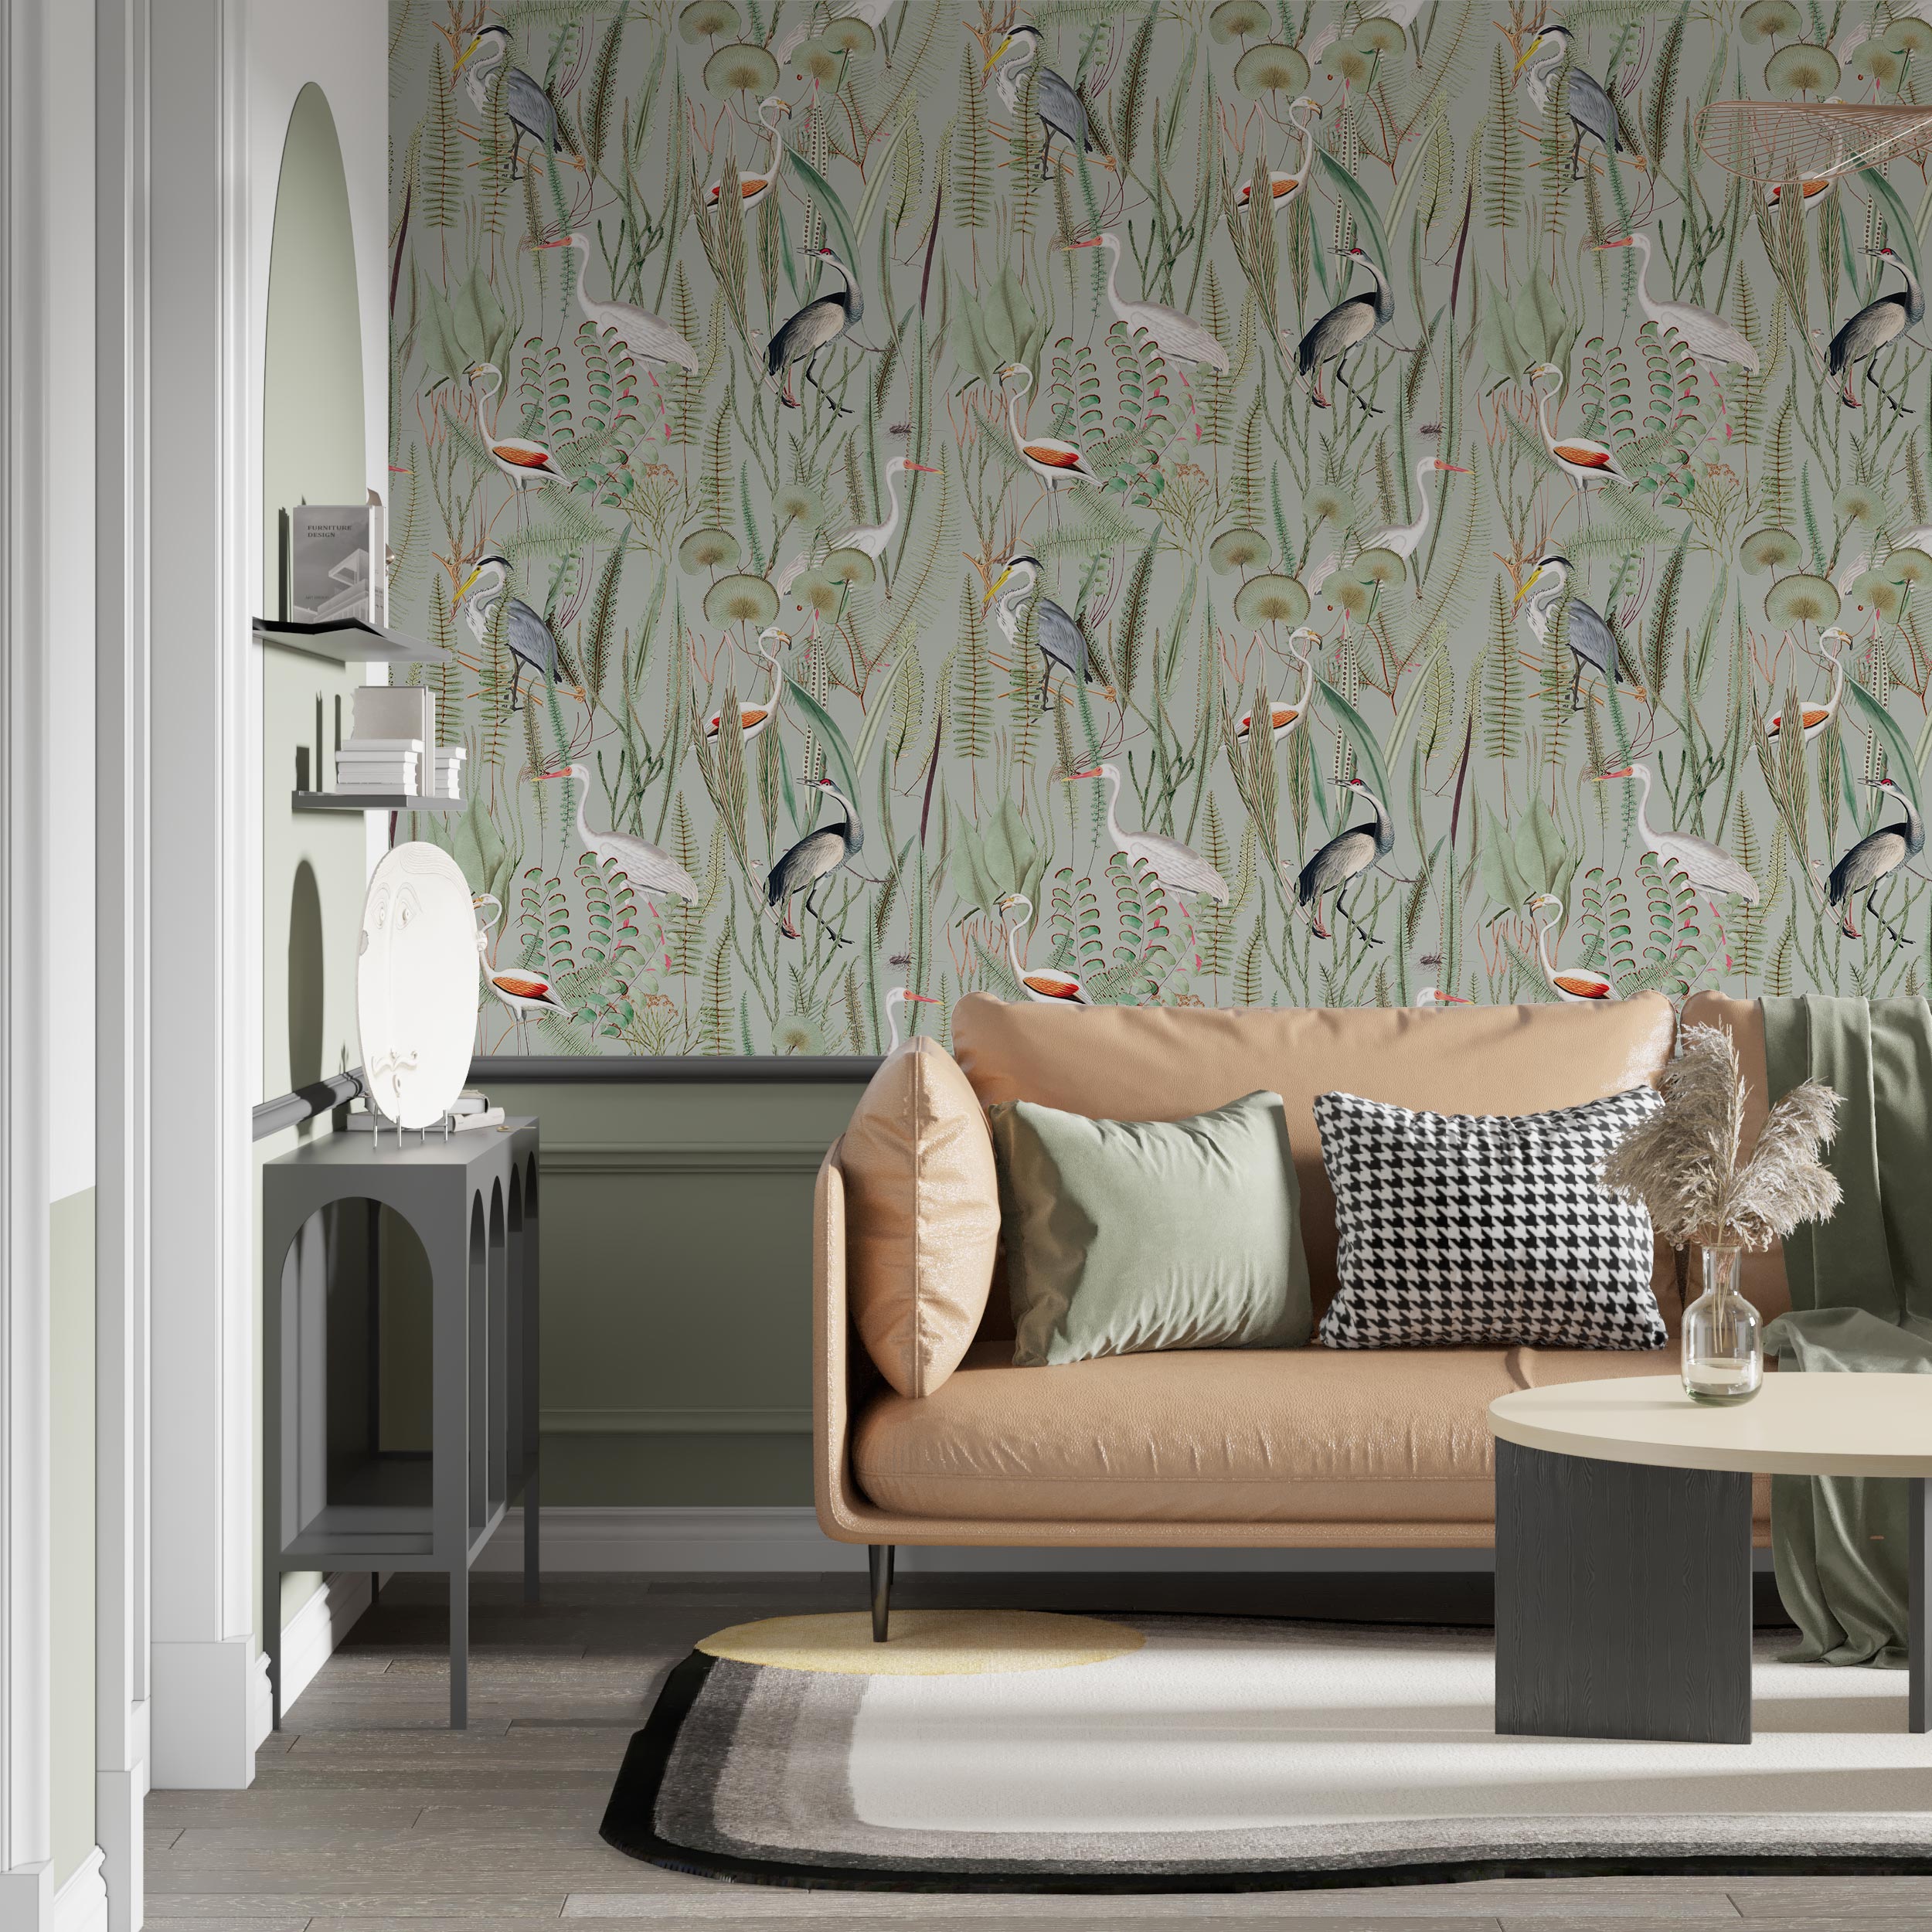 files/Transform-Any-Space-with-Sage-Heron-Peel-and-Stick-Wallpaper-_-Ideal-for-Bedroom-Accent-Walls.jpg